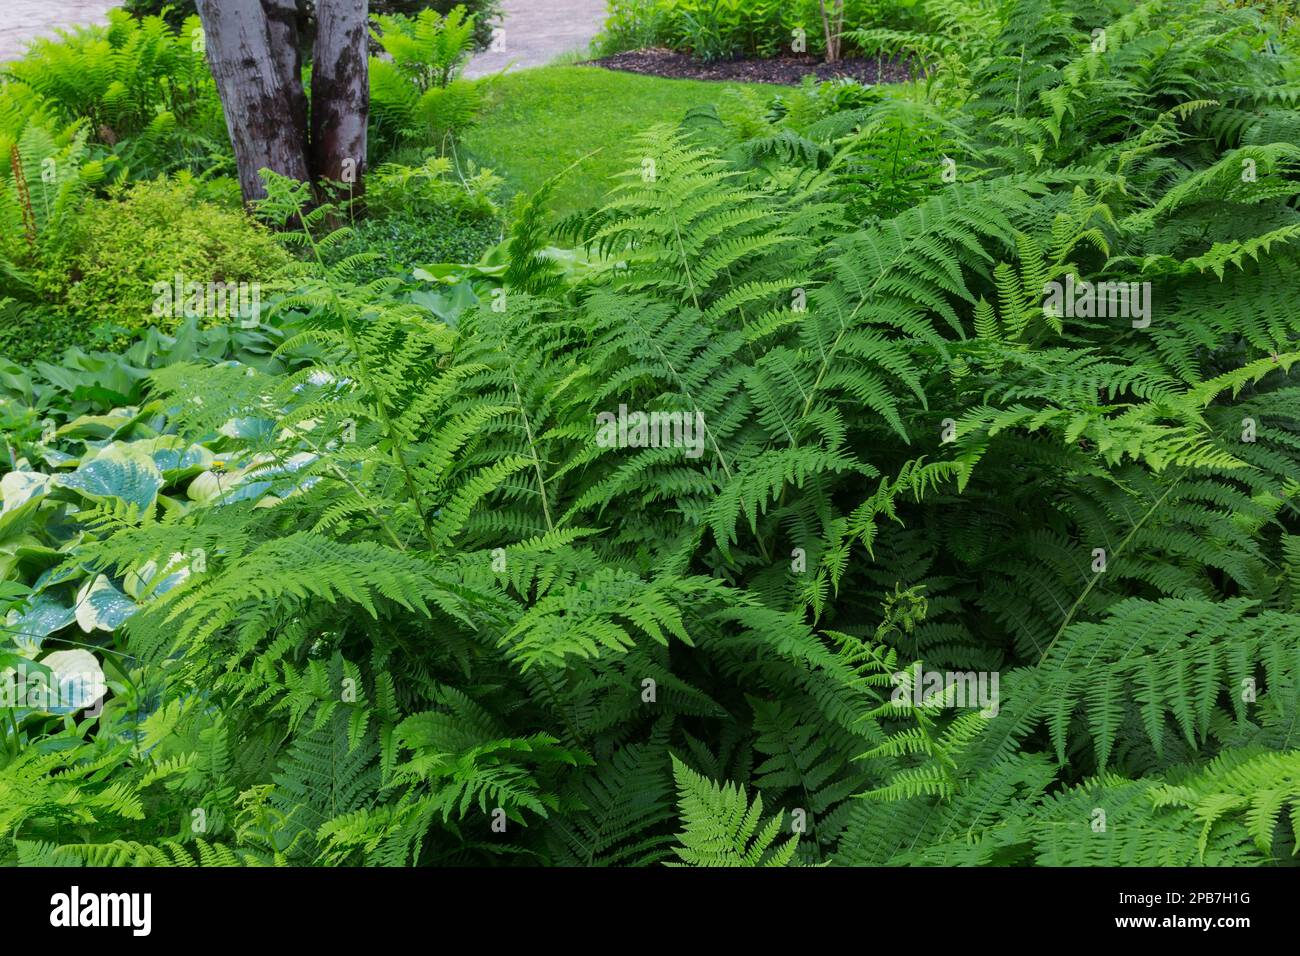 Athyrium filix-femina - Lady Fern, Hosta and Acer rubrum - Red Maple tree trunks in mixed border in front yard garden in spring. Stock Photo